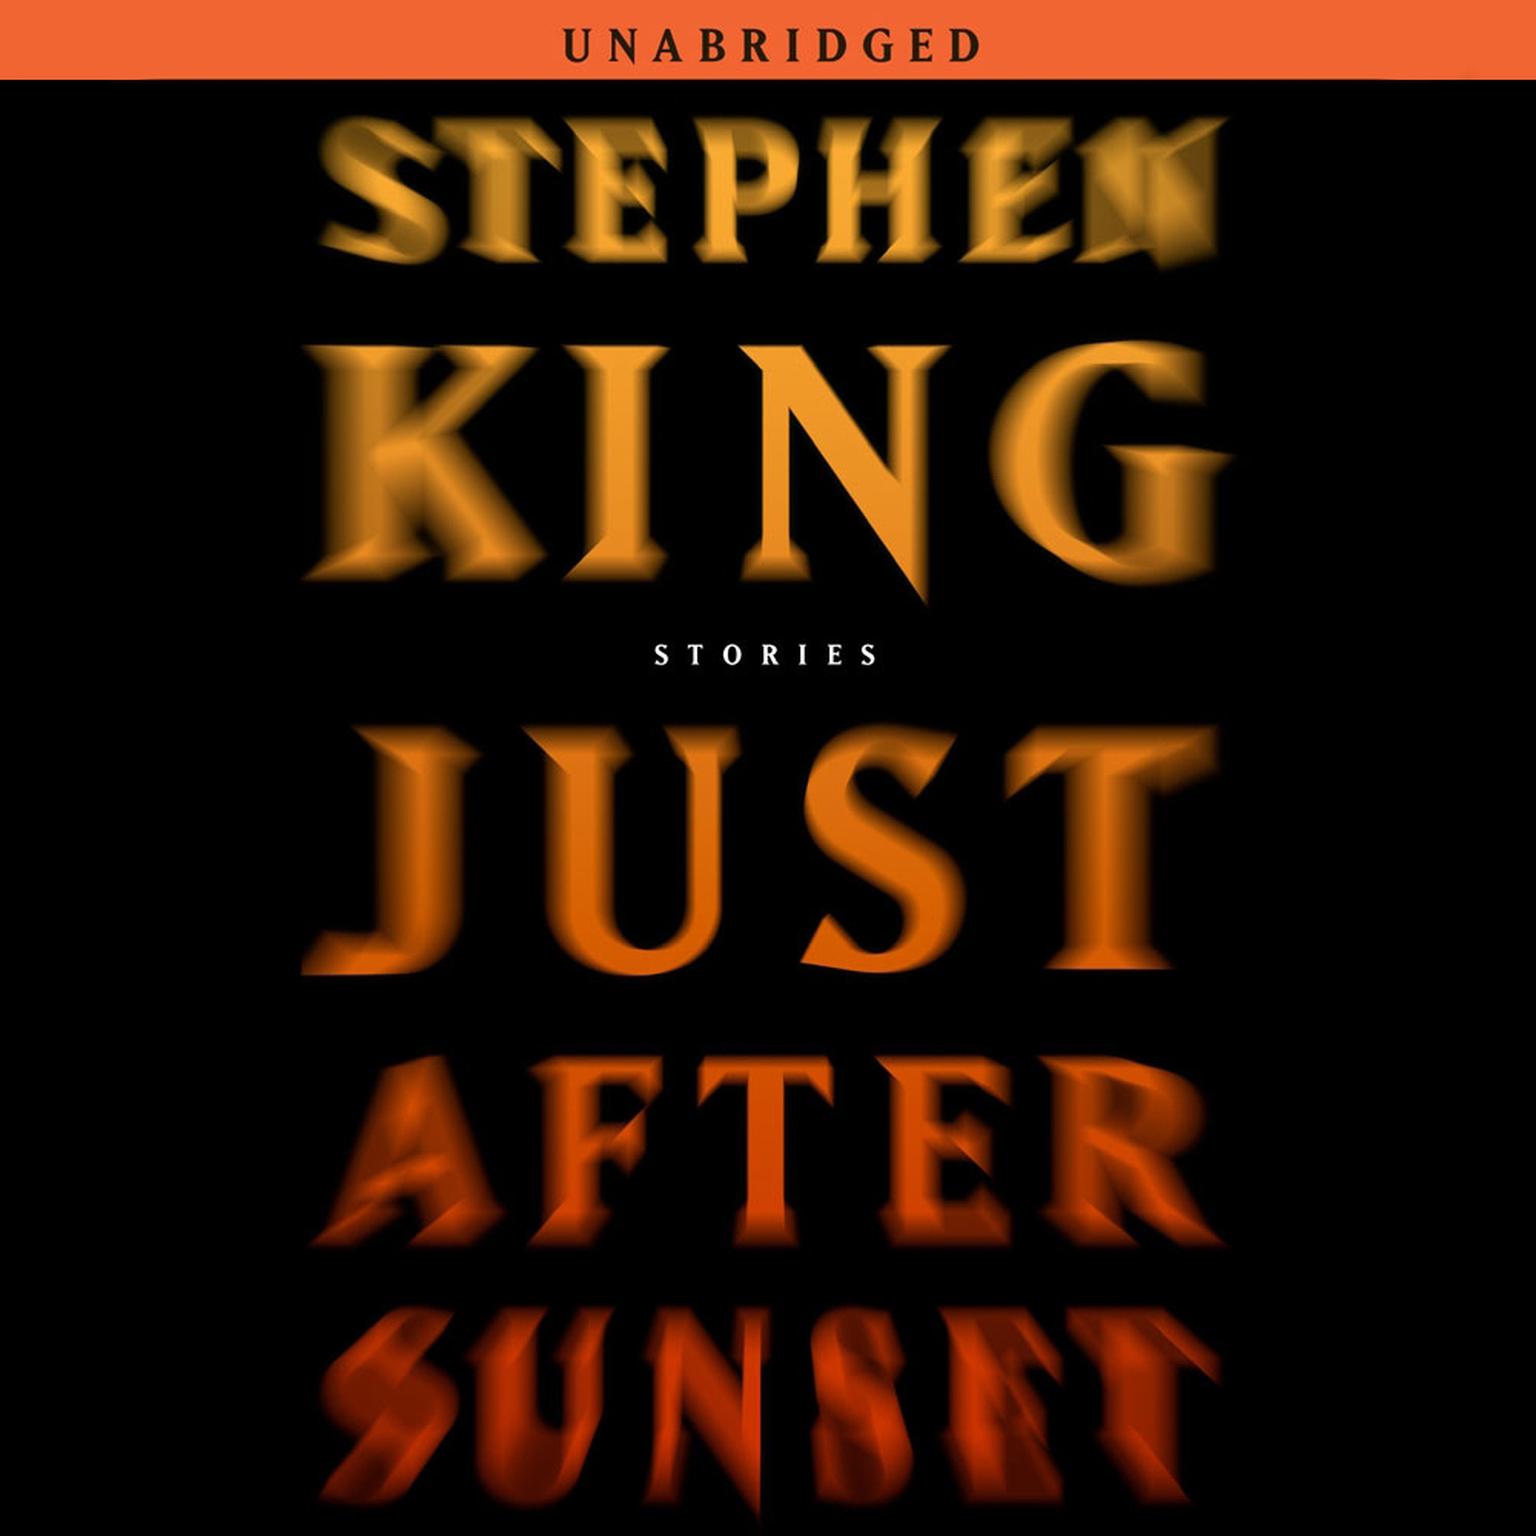 Just After Sunset: Stories Audiobook, by Stephen King